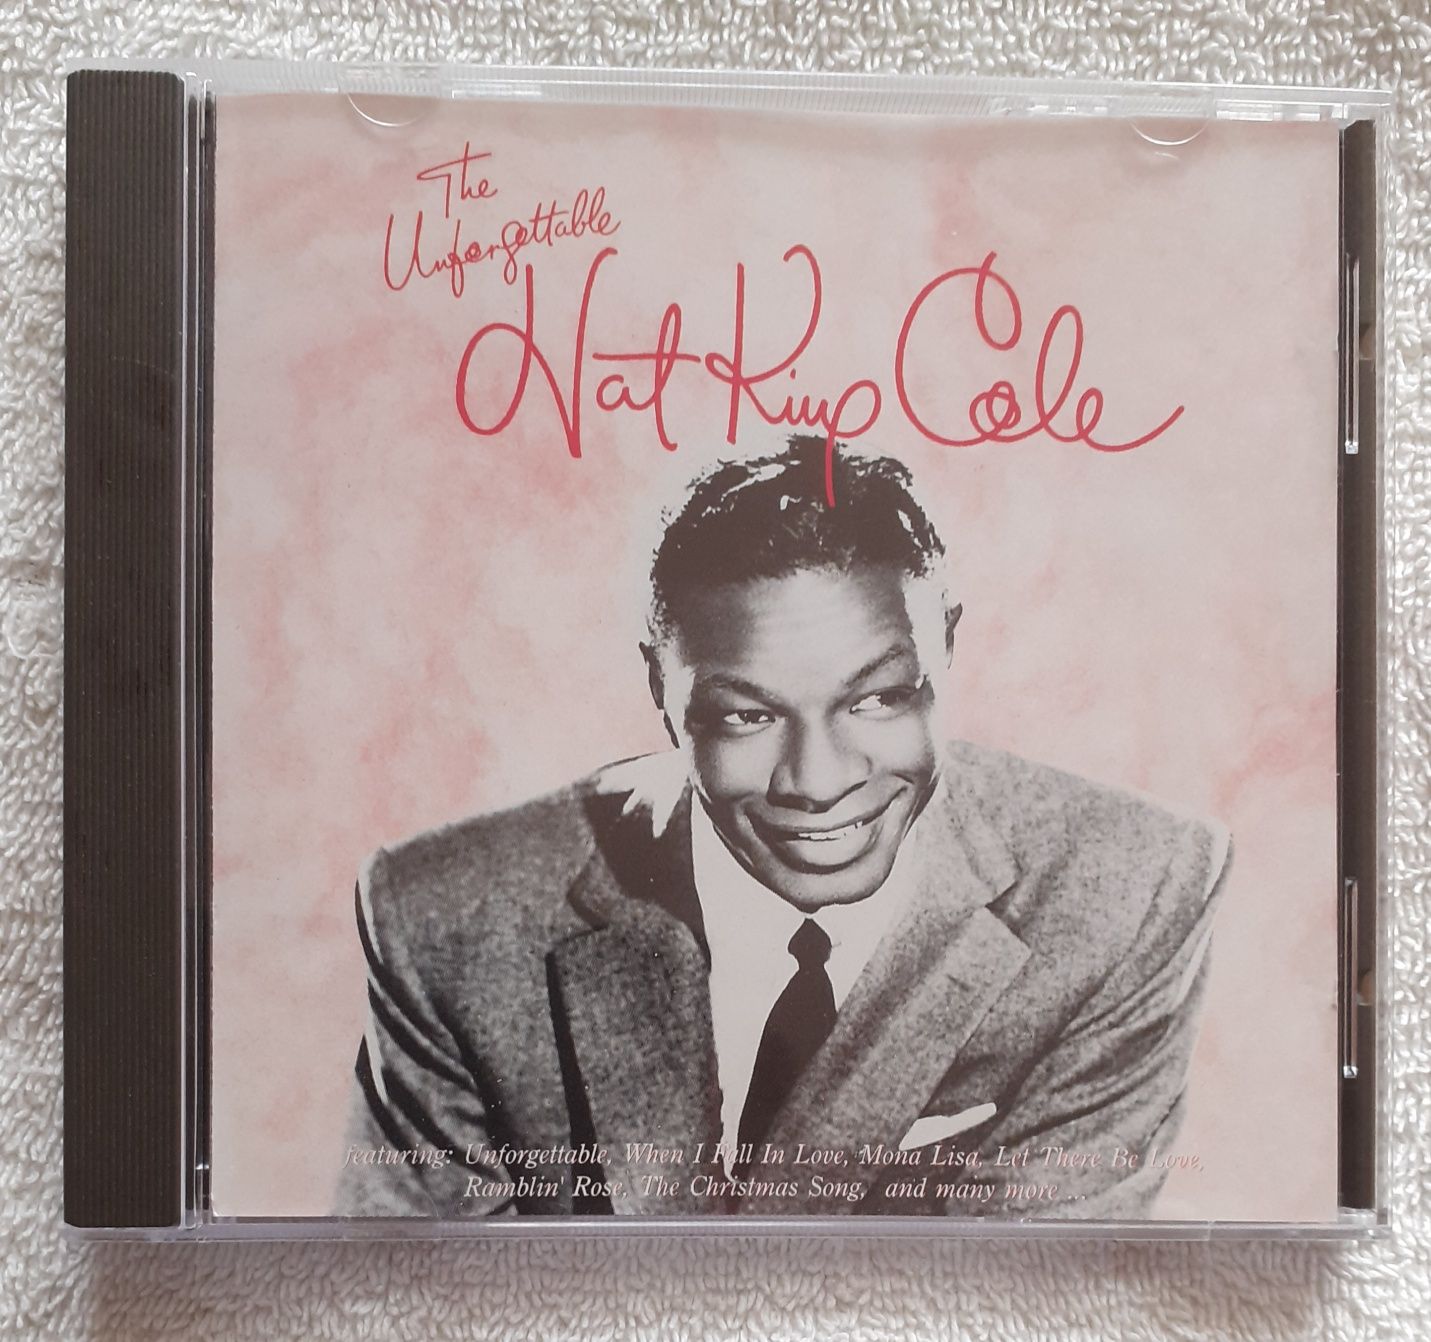 Nat King Cole ‎– The Unforgettable Nat King Cole (CD)